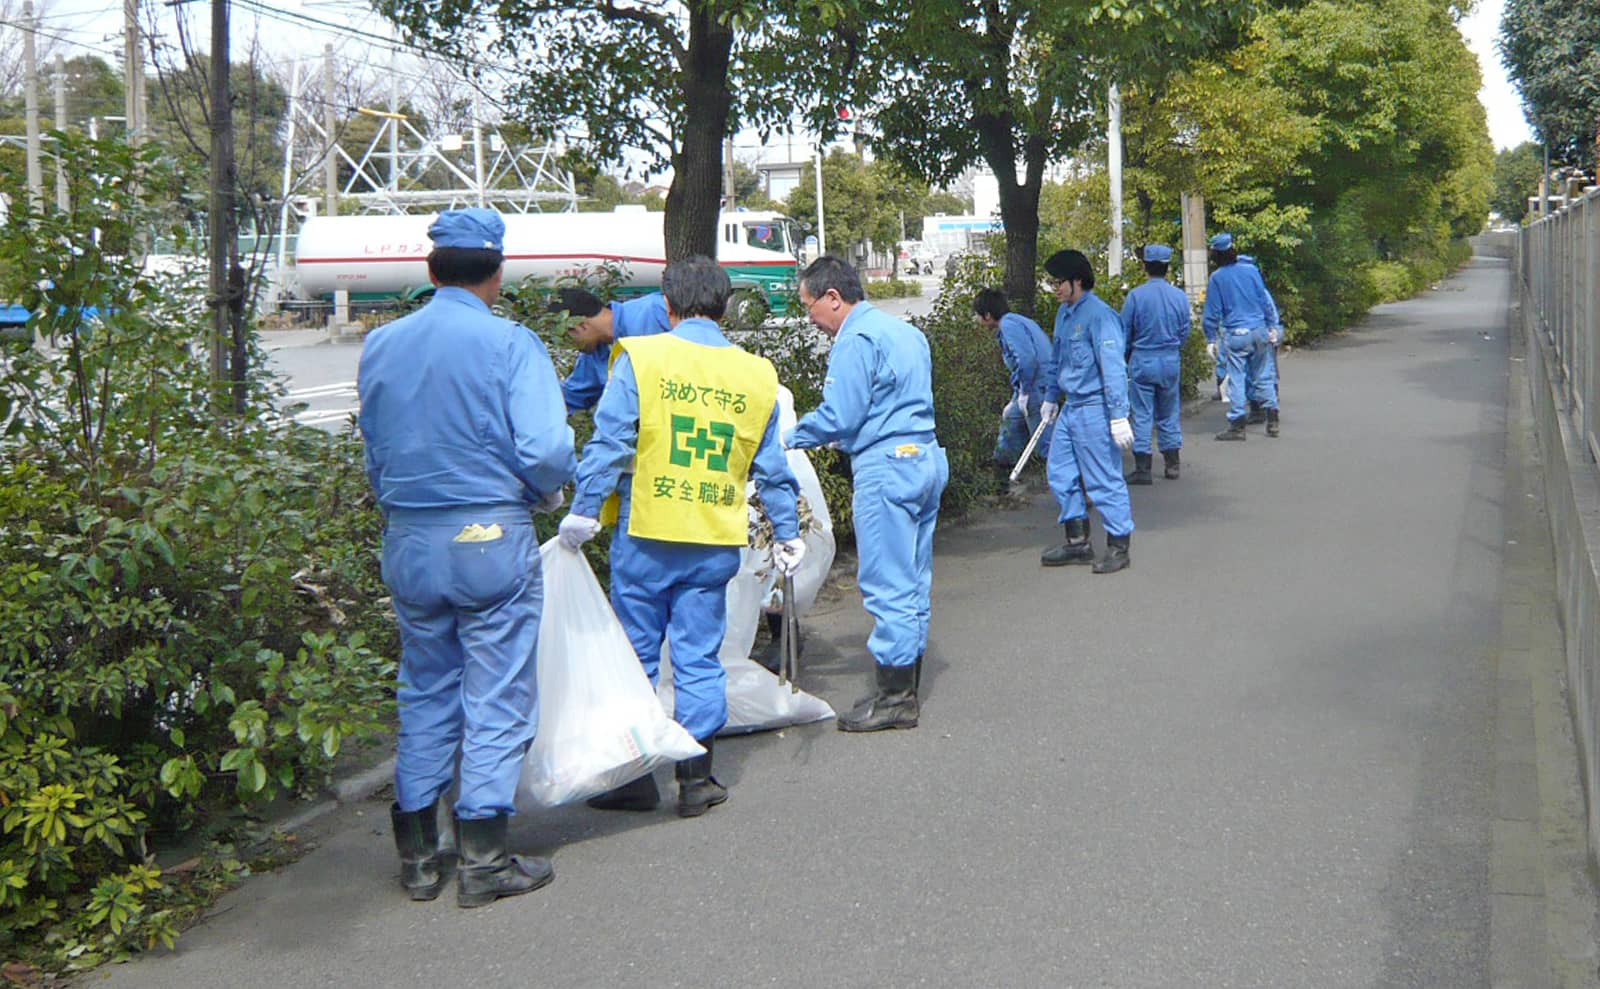 Kawasaki Plant - Cleaning up our city